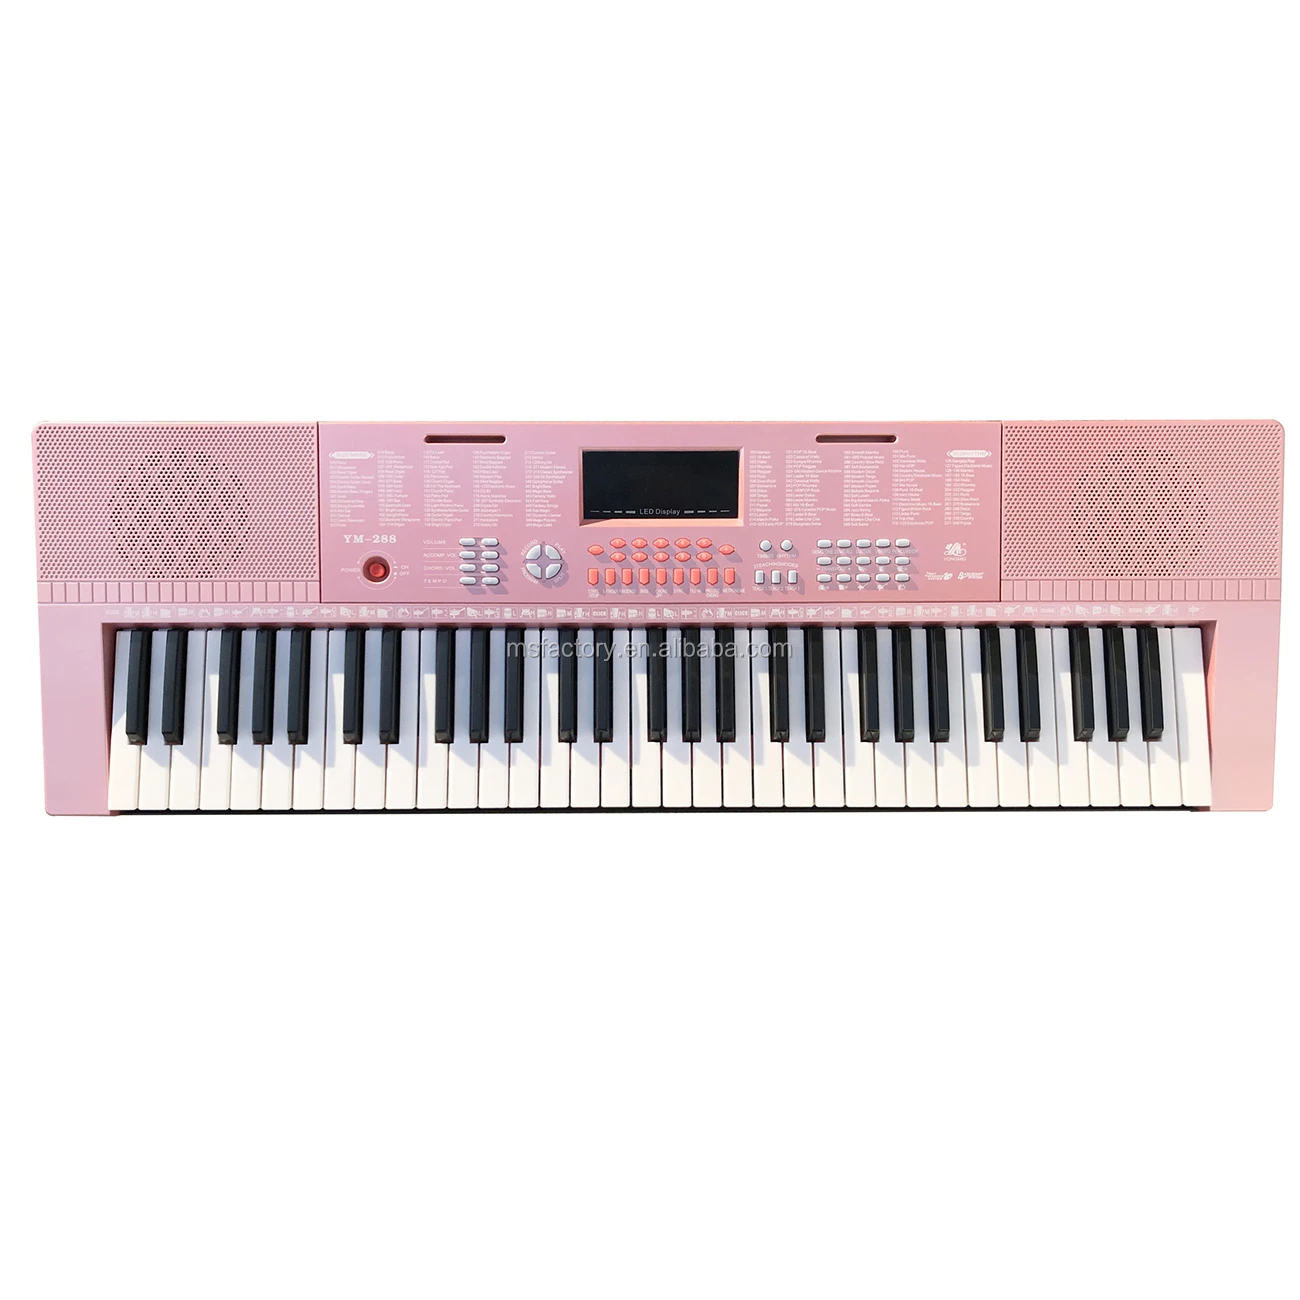 Factory price 61 keys piano electronic keyboard electric organo music synthesizer